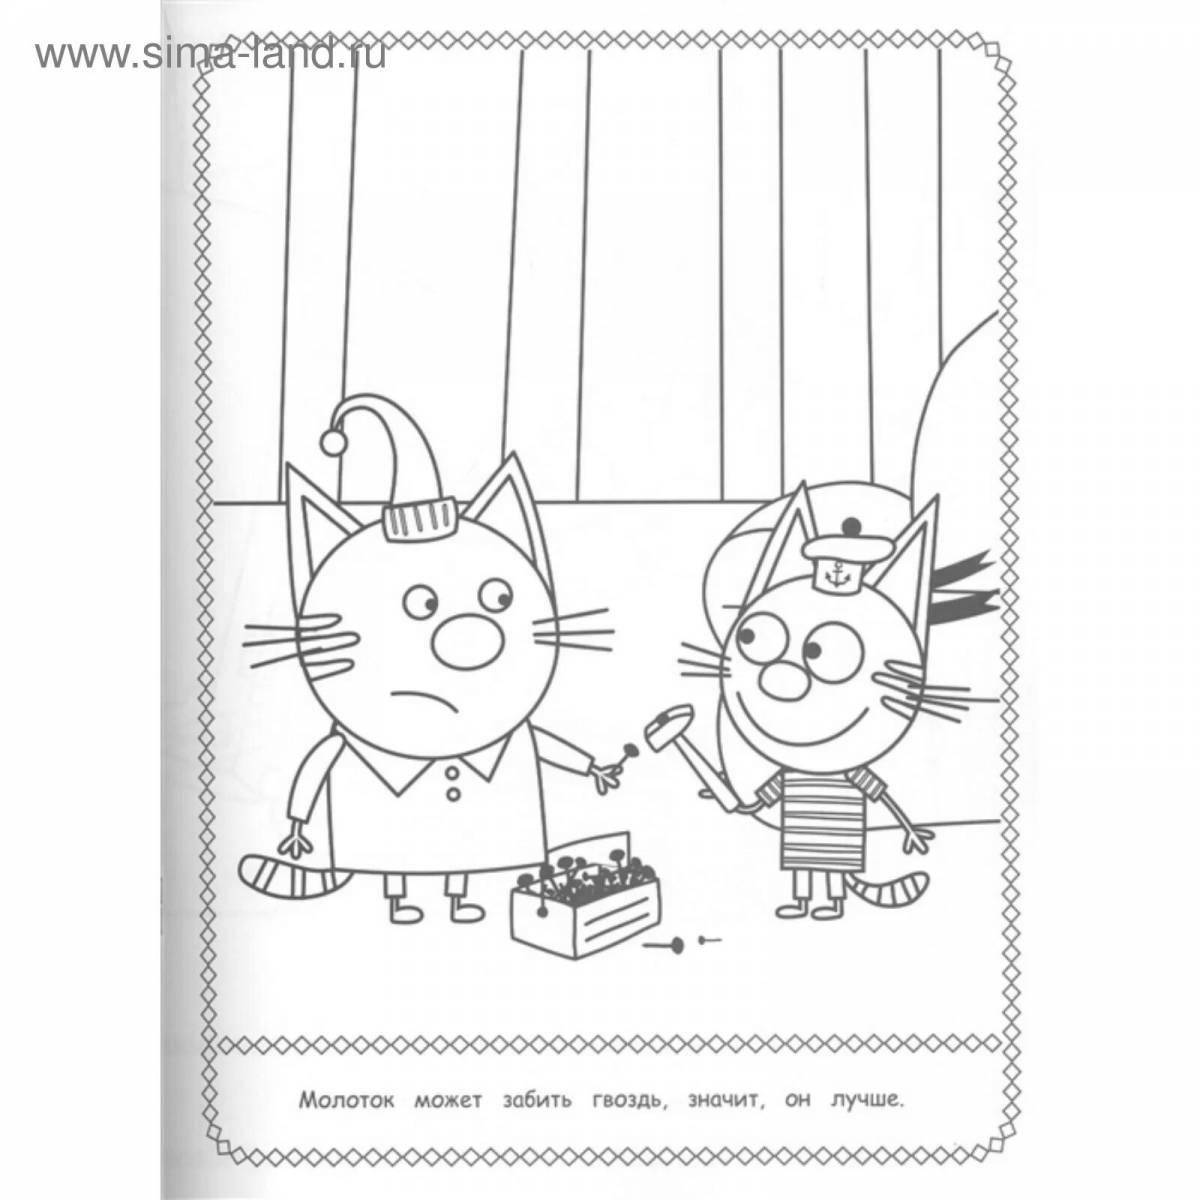 Joyful three cats coloring book for kids